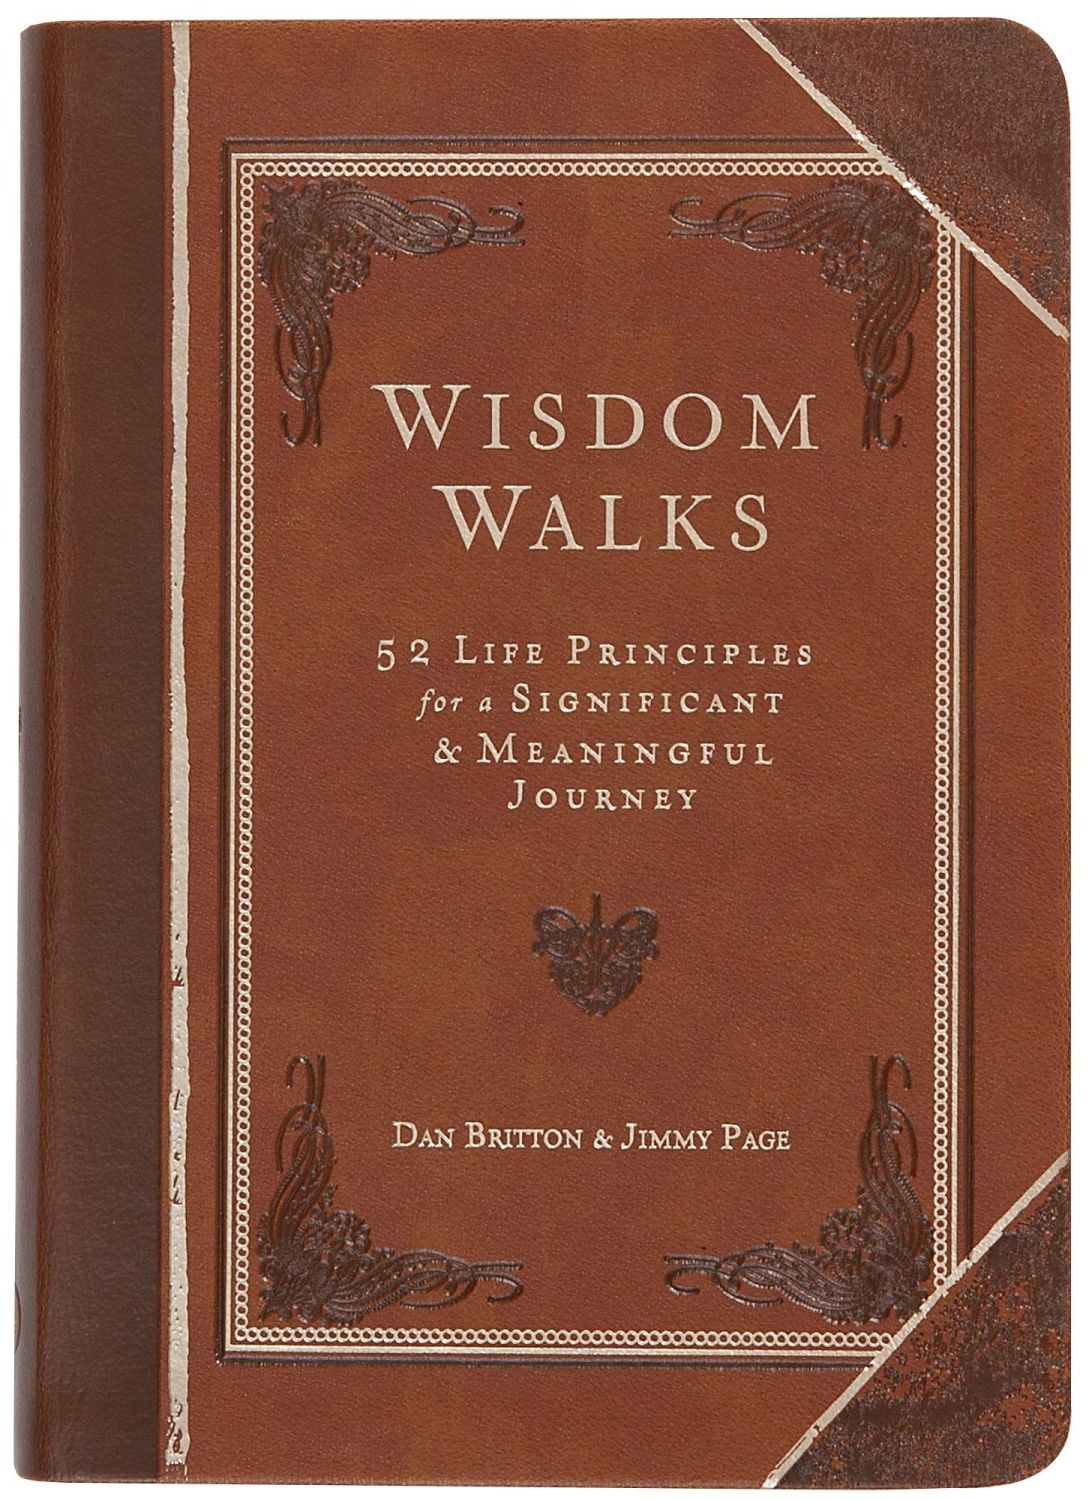 Wisdom Walks: 52 Life Principles for a Significant and Meaningful Journey (